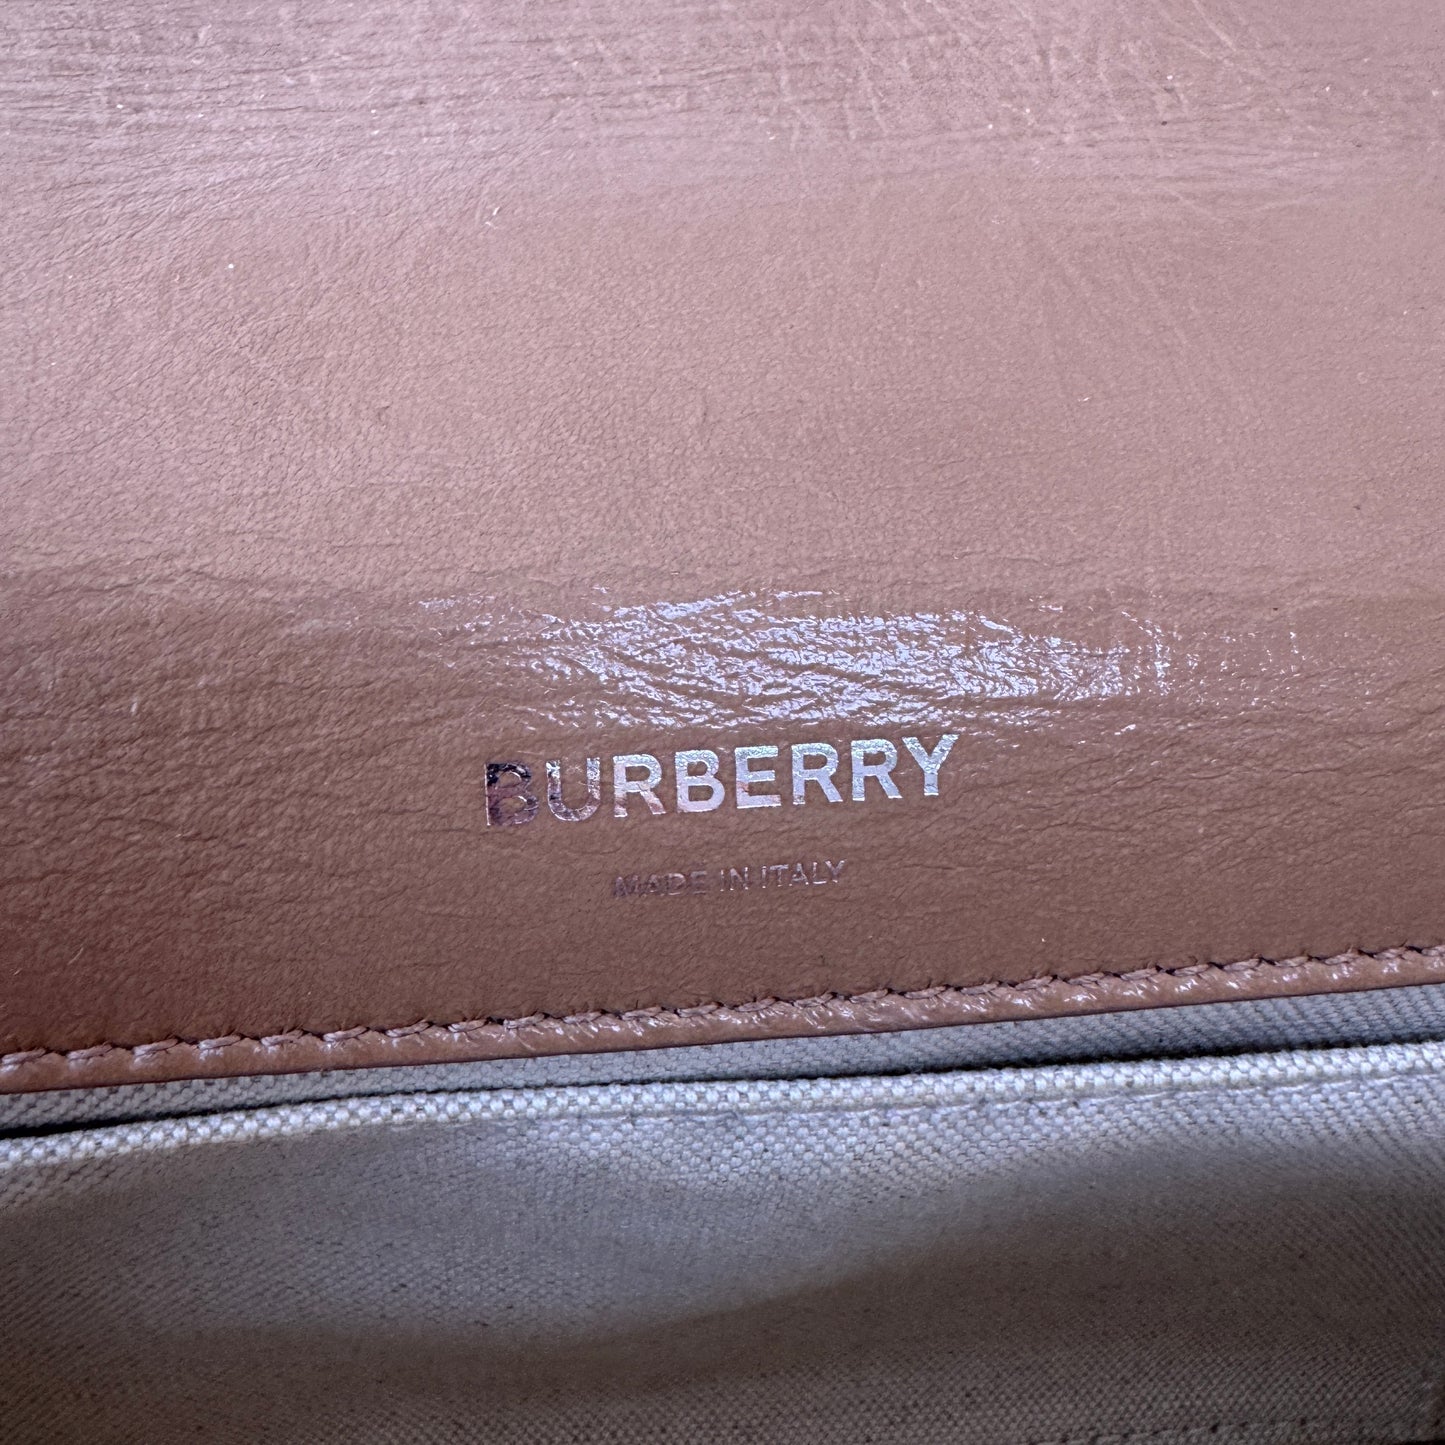 Burberry Lola Small Patent Leather Resin Shoulder Bag